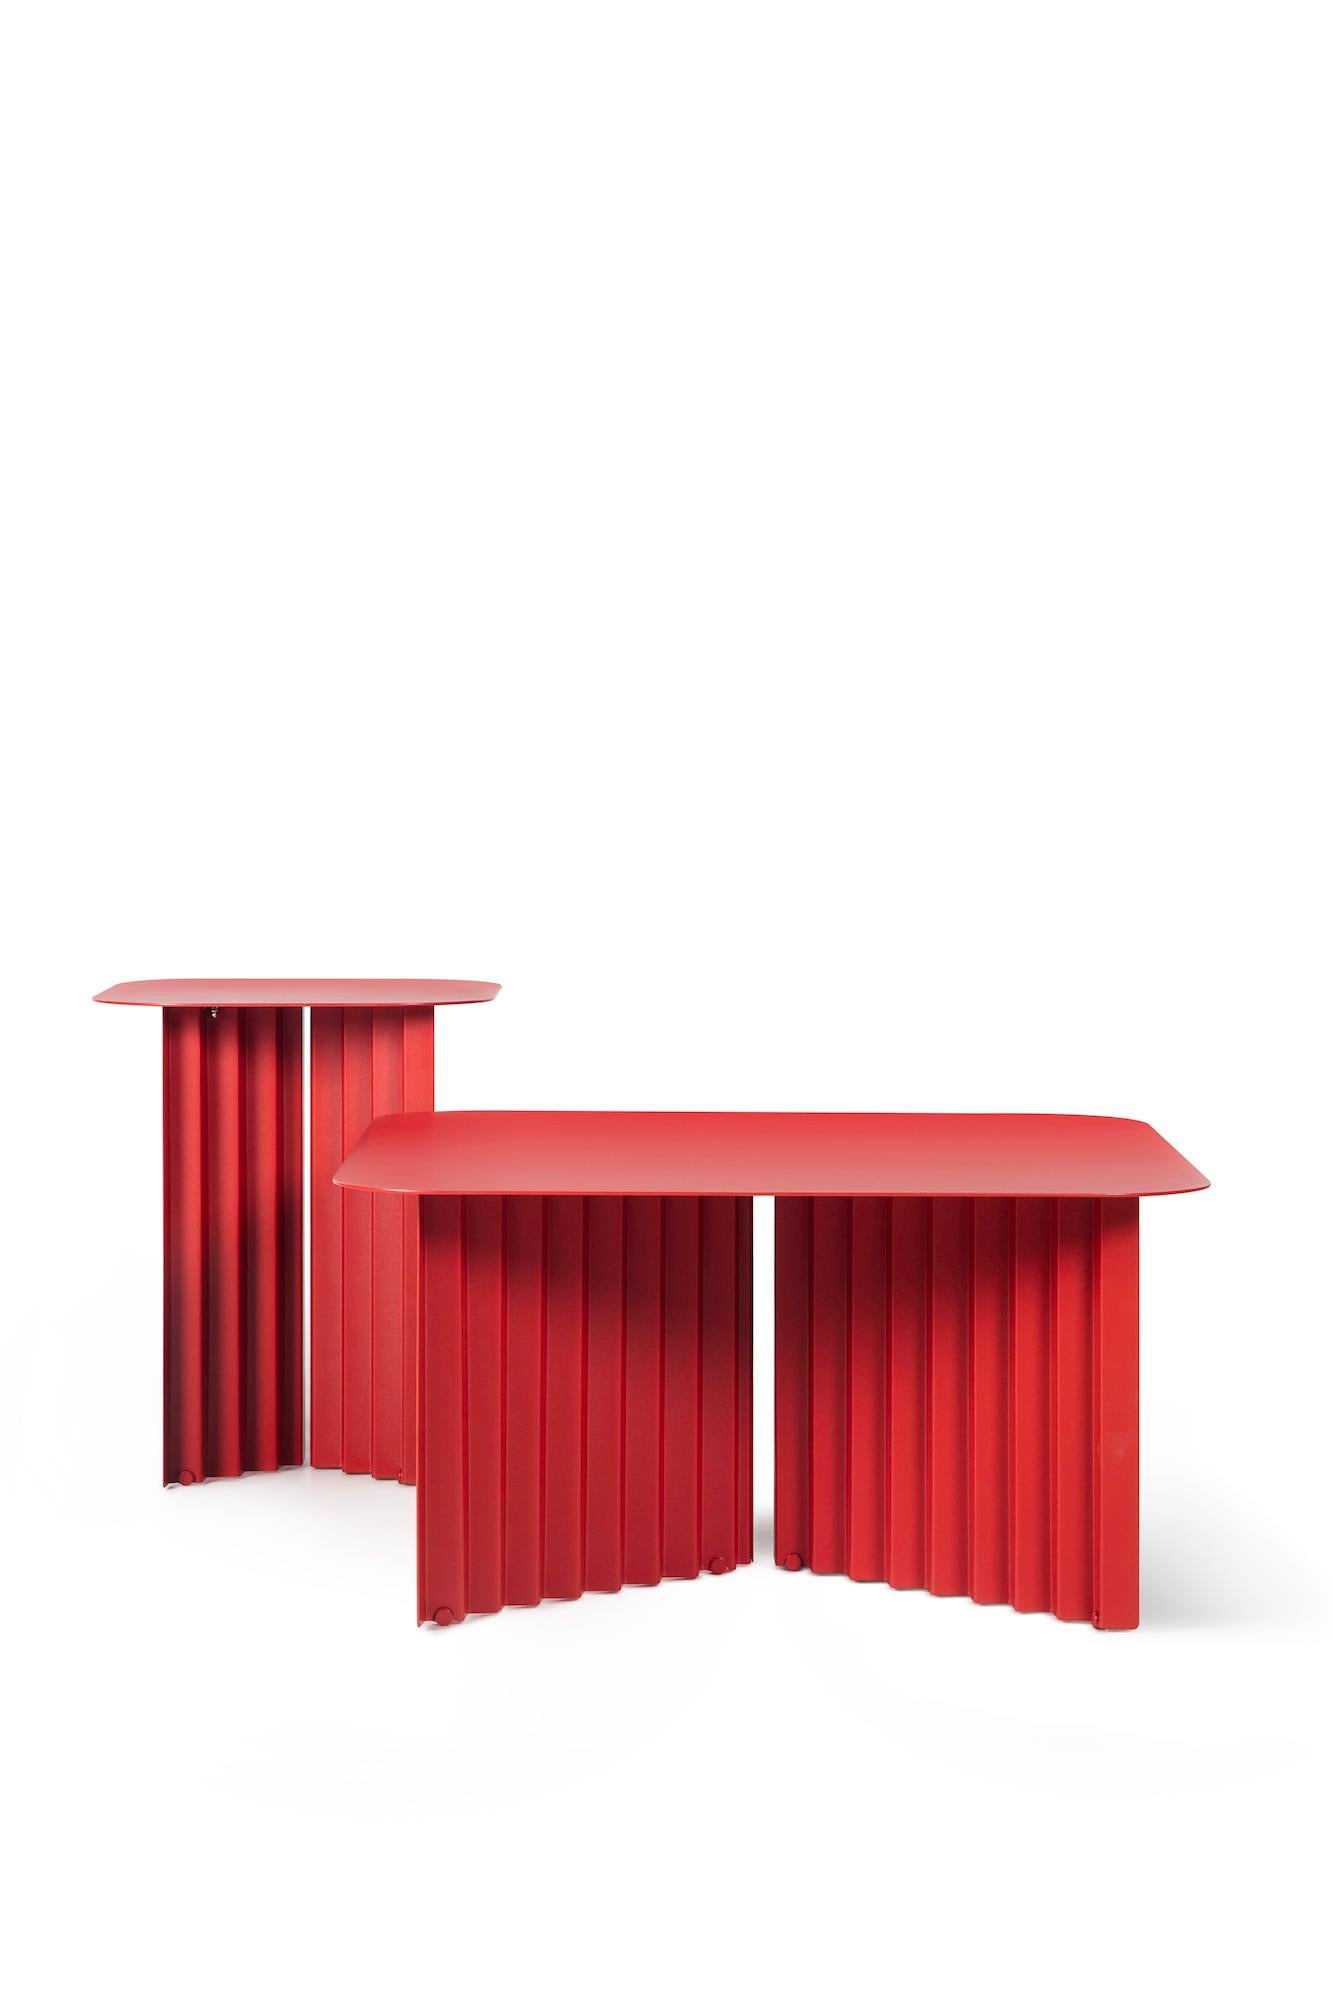 Modern RS Barcelona Plec Medium Table in Red Metal by A.P.O. For Sale